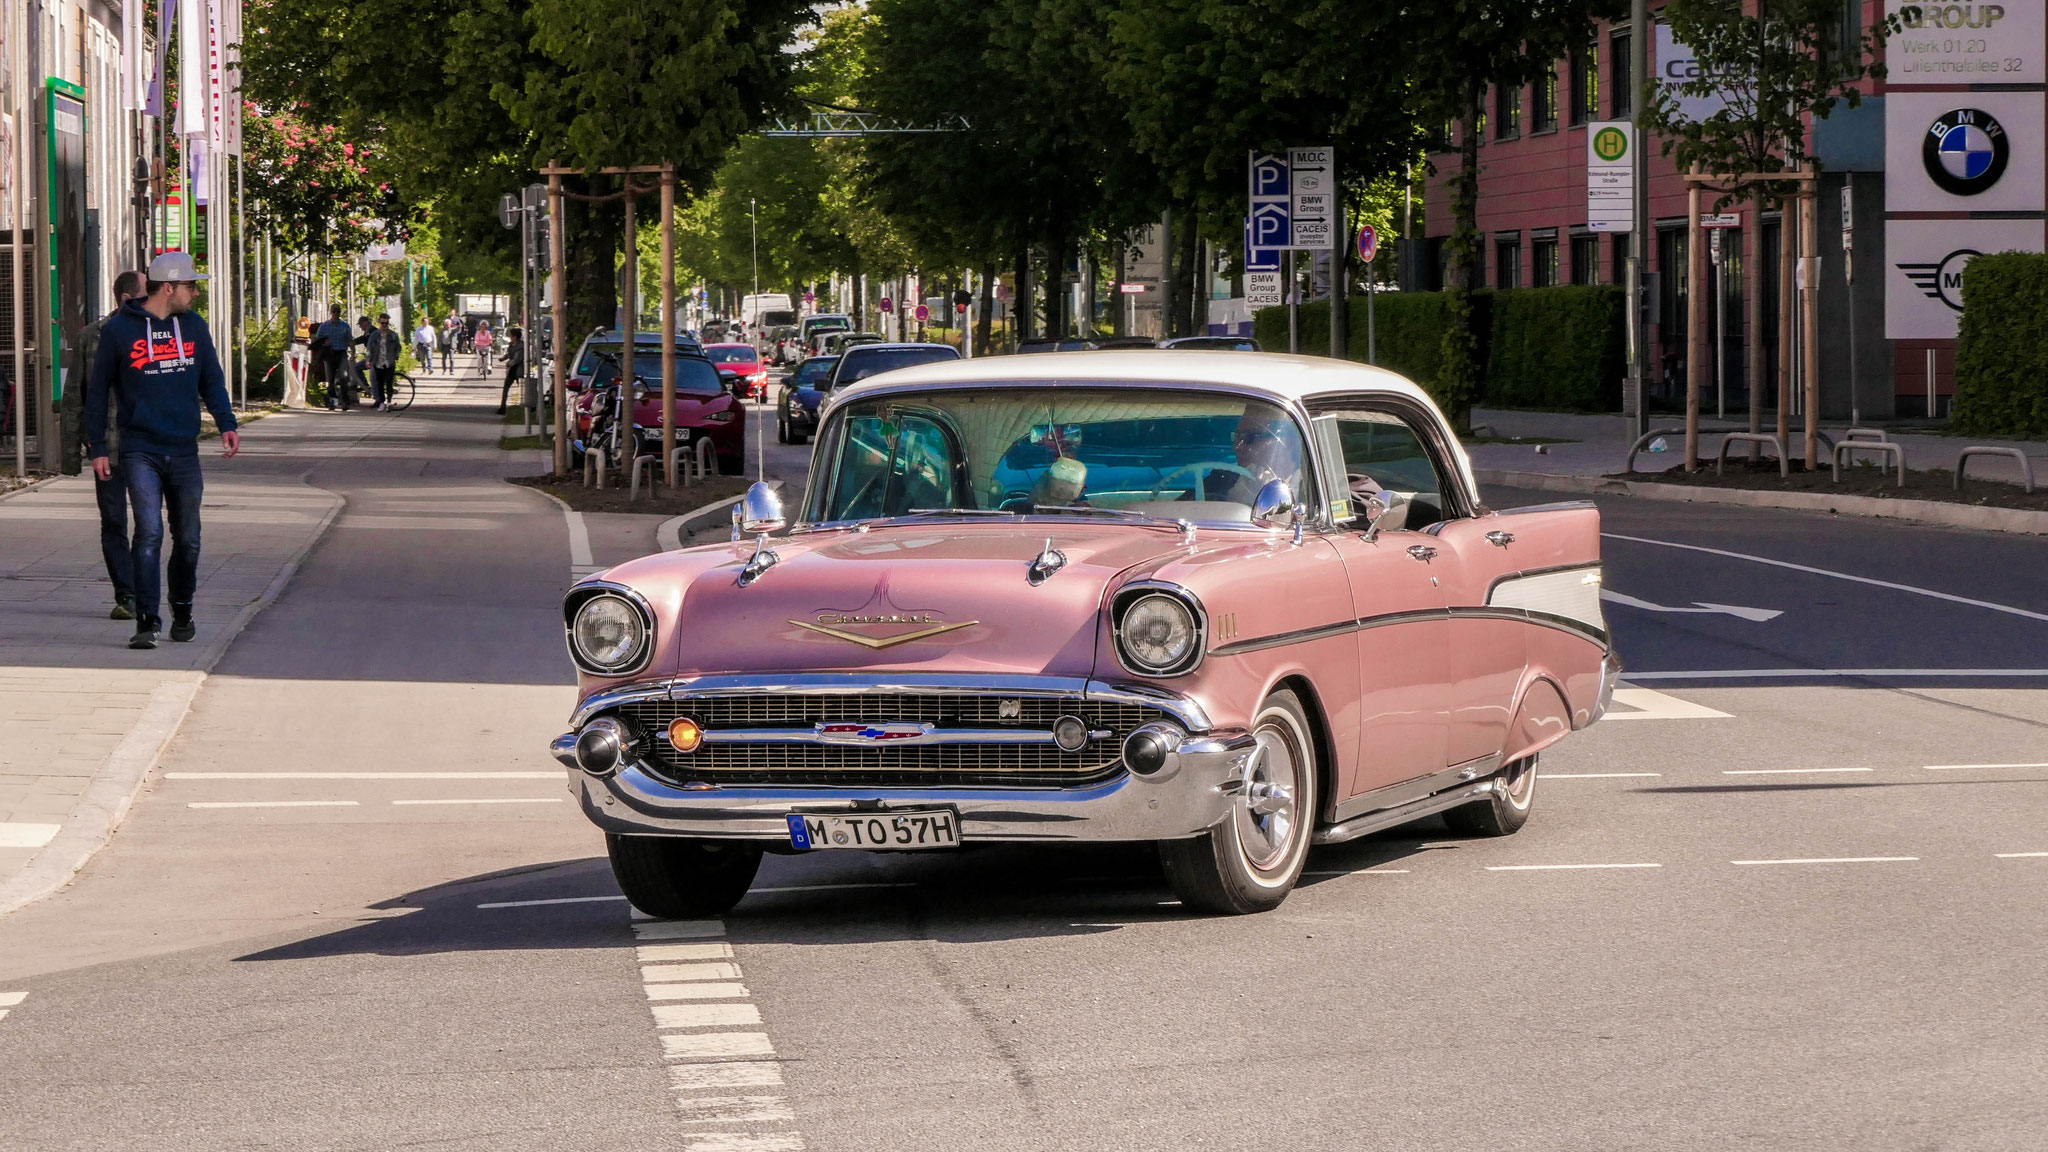 Chevrolet Bel Air - M-TO57H